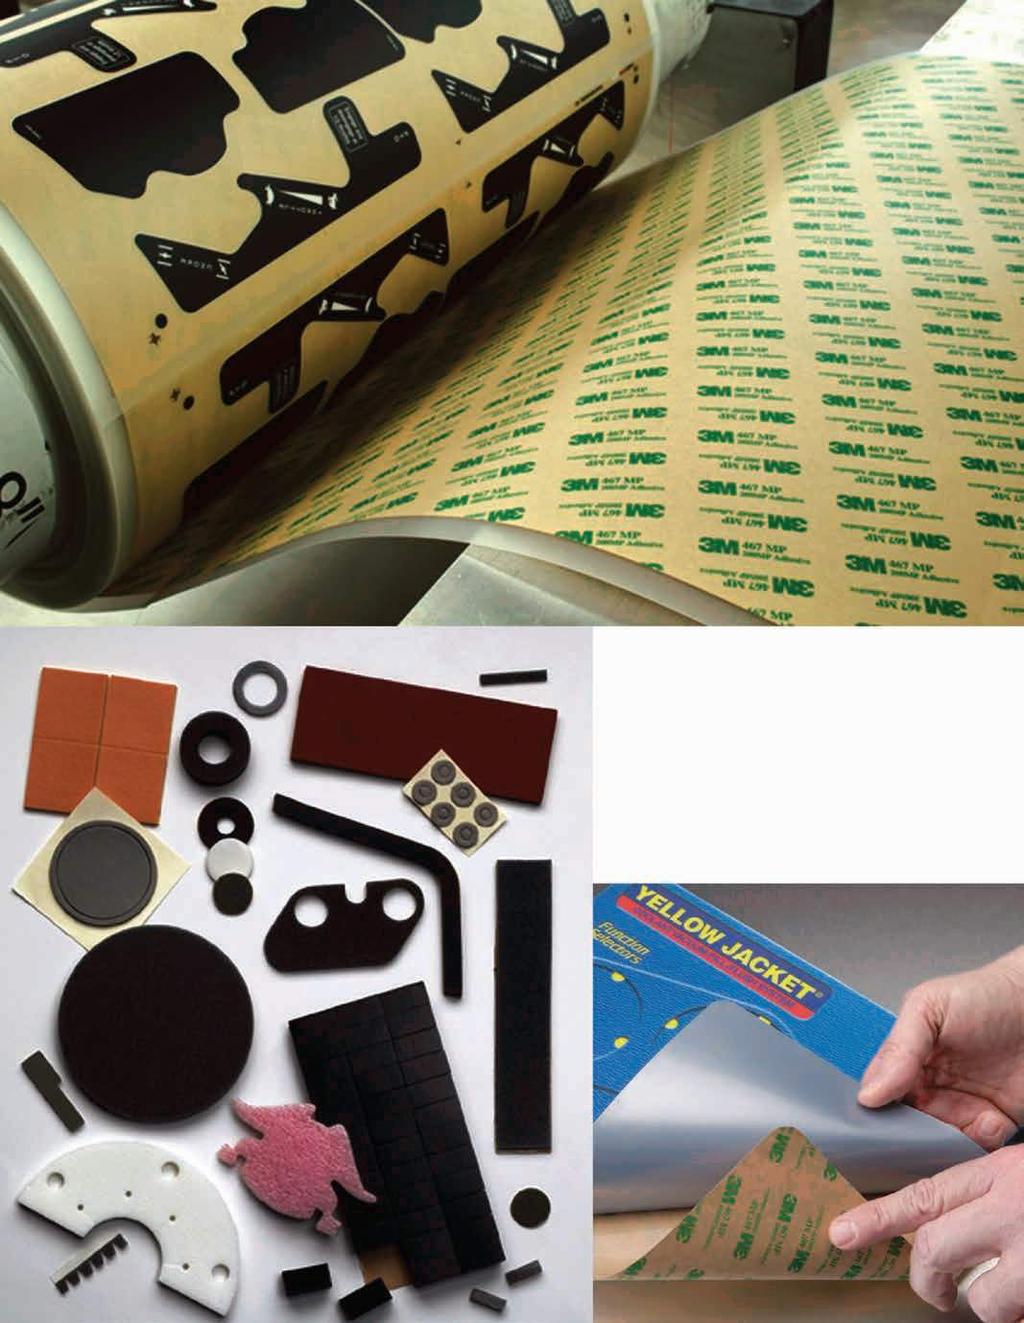 Bonding Tapes Improve Your Products Appearance, Performance and Process When it comes to bonding tapes, you need comprehensive and versatile solutions that are convenient and easy to use.